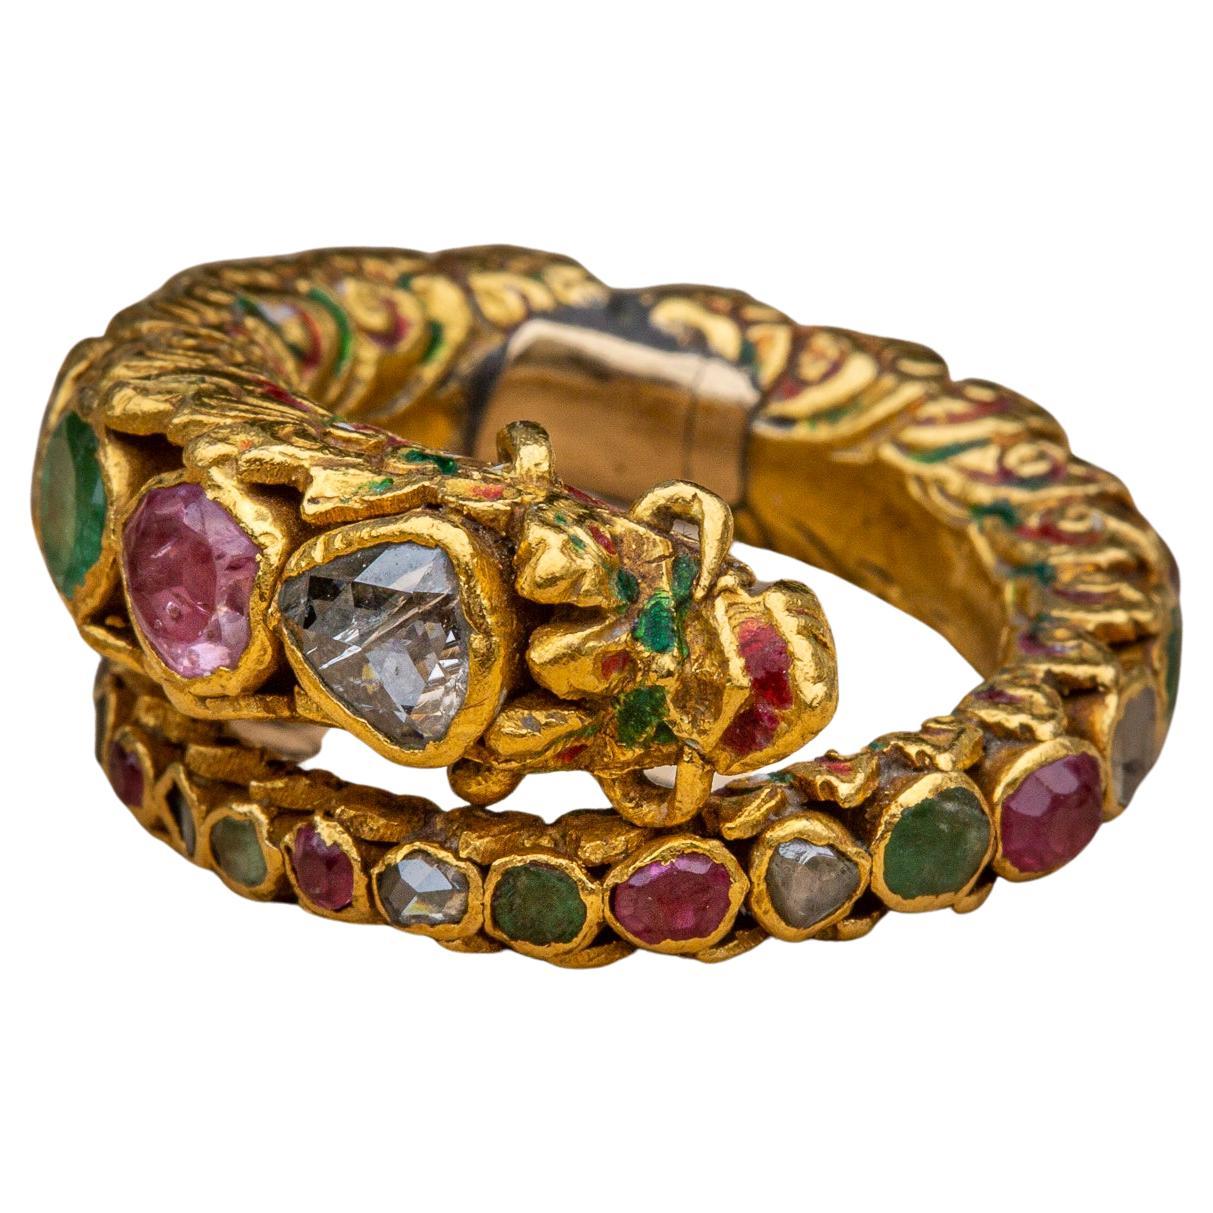 A late 18th century gem-set royal gold ceremonial Naga ring made in Siam during the Rattanakosin period. The ring takes the form of a mythical serpent known as a ‘Naga’. 

Prevalent throughout Buddhism and Southeast Asian art, the Naga is a mythical